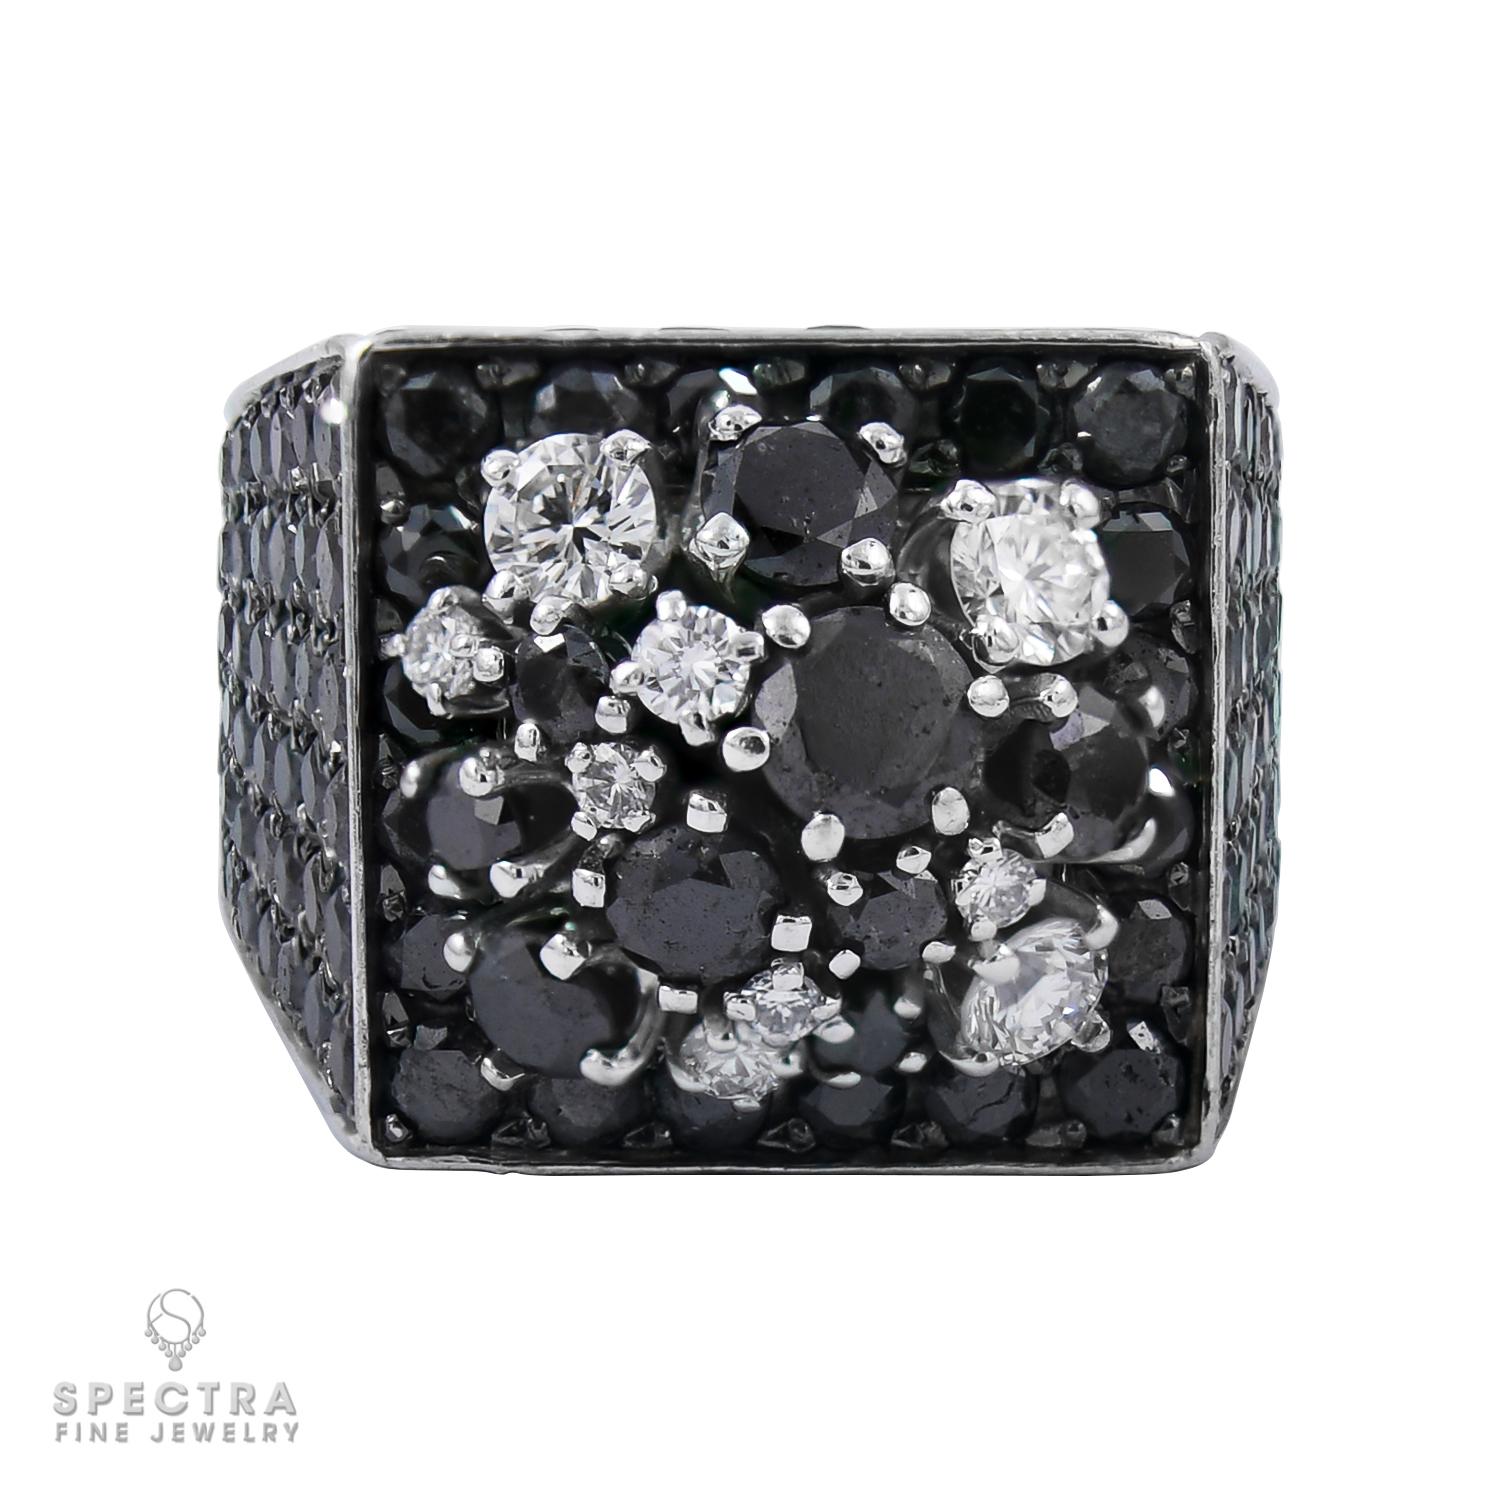 A chic cocktail ring set with round black diamonds, weighing a total of approximately 11.27 carats, crafted in 18k white gold. The ring's top measures 11/16 x 11/16 inch.
Size 6.25 (EU 52).
Gross weight: 29.50 grams.
Signed: de GRISOGONO.
Numbered: